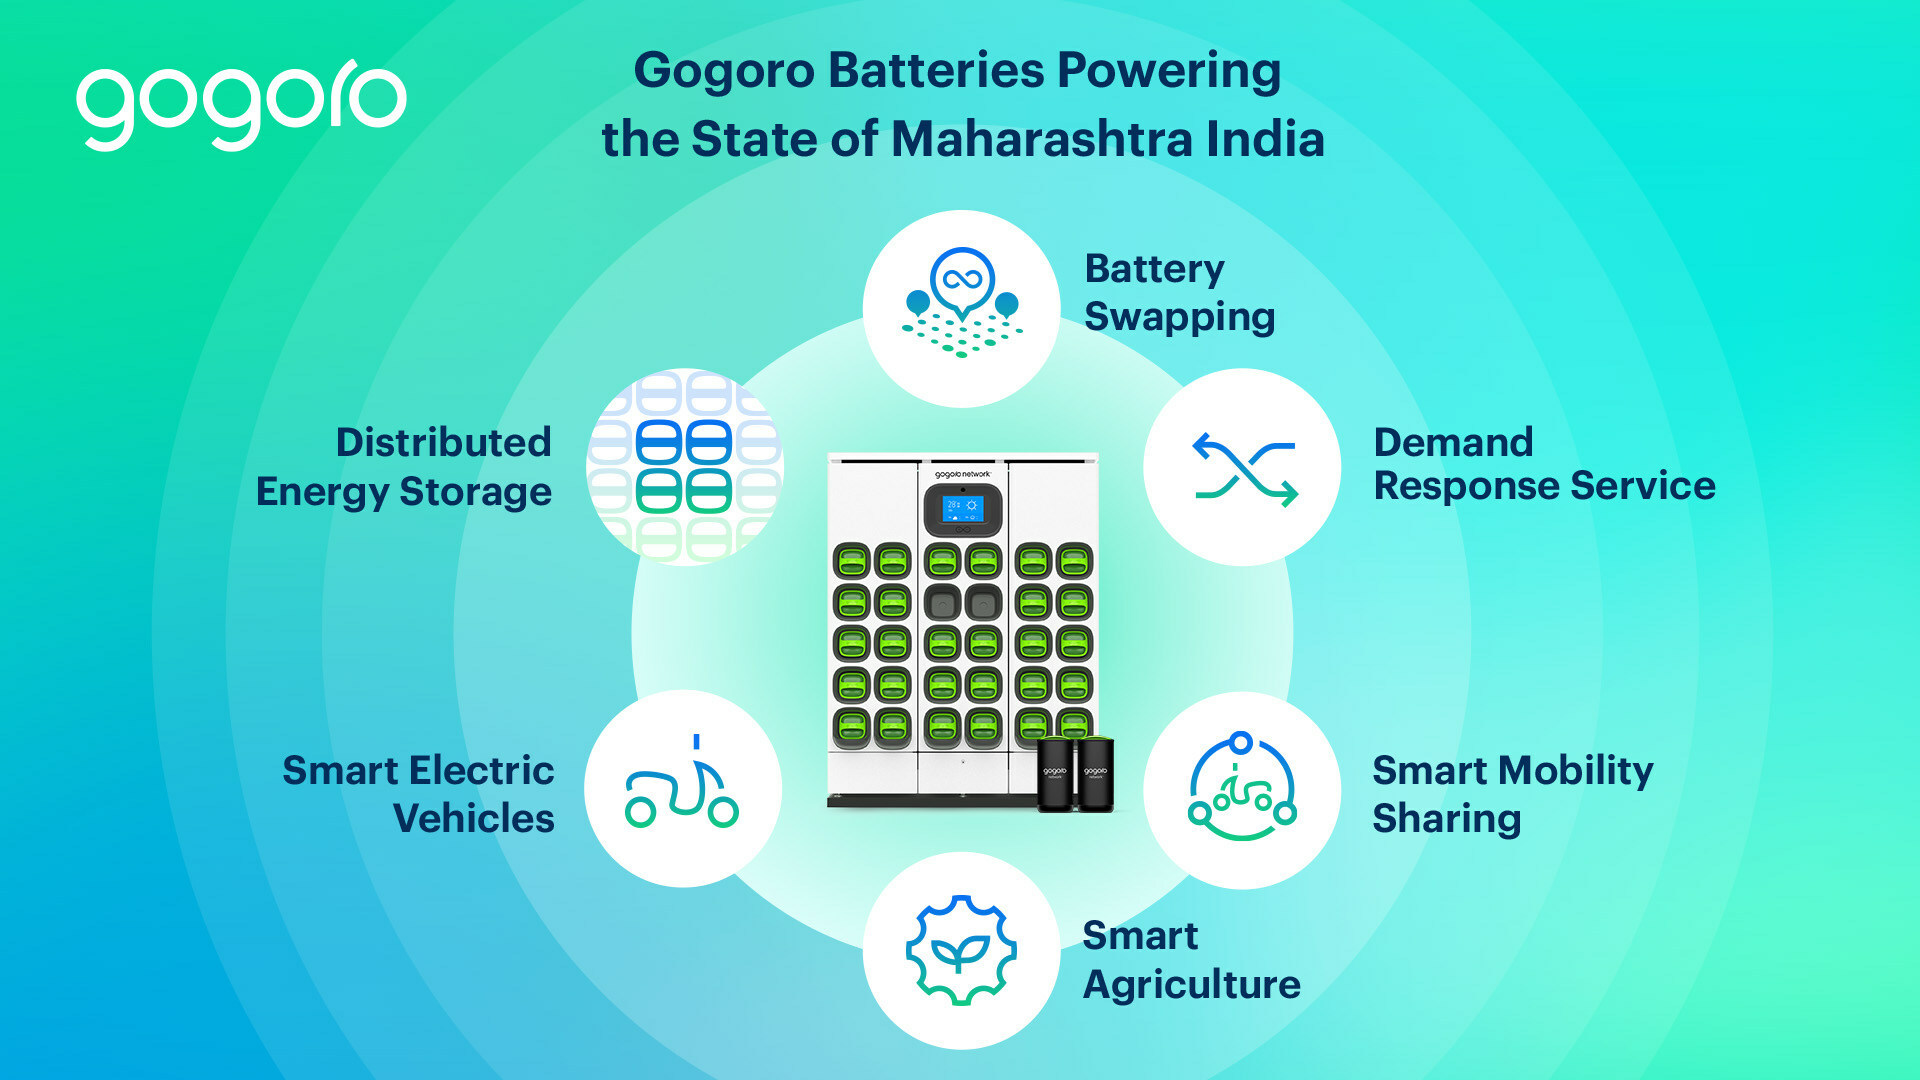 The State of Maharashtra in India has partnered with Gogoro and Belrise Industries to establish a US$2.5bn battery-swapping infrastructure